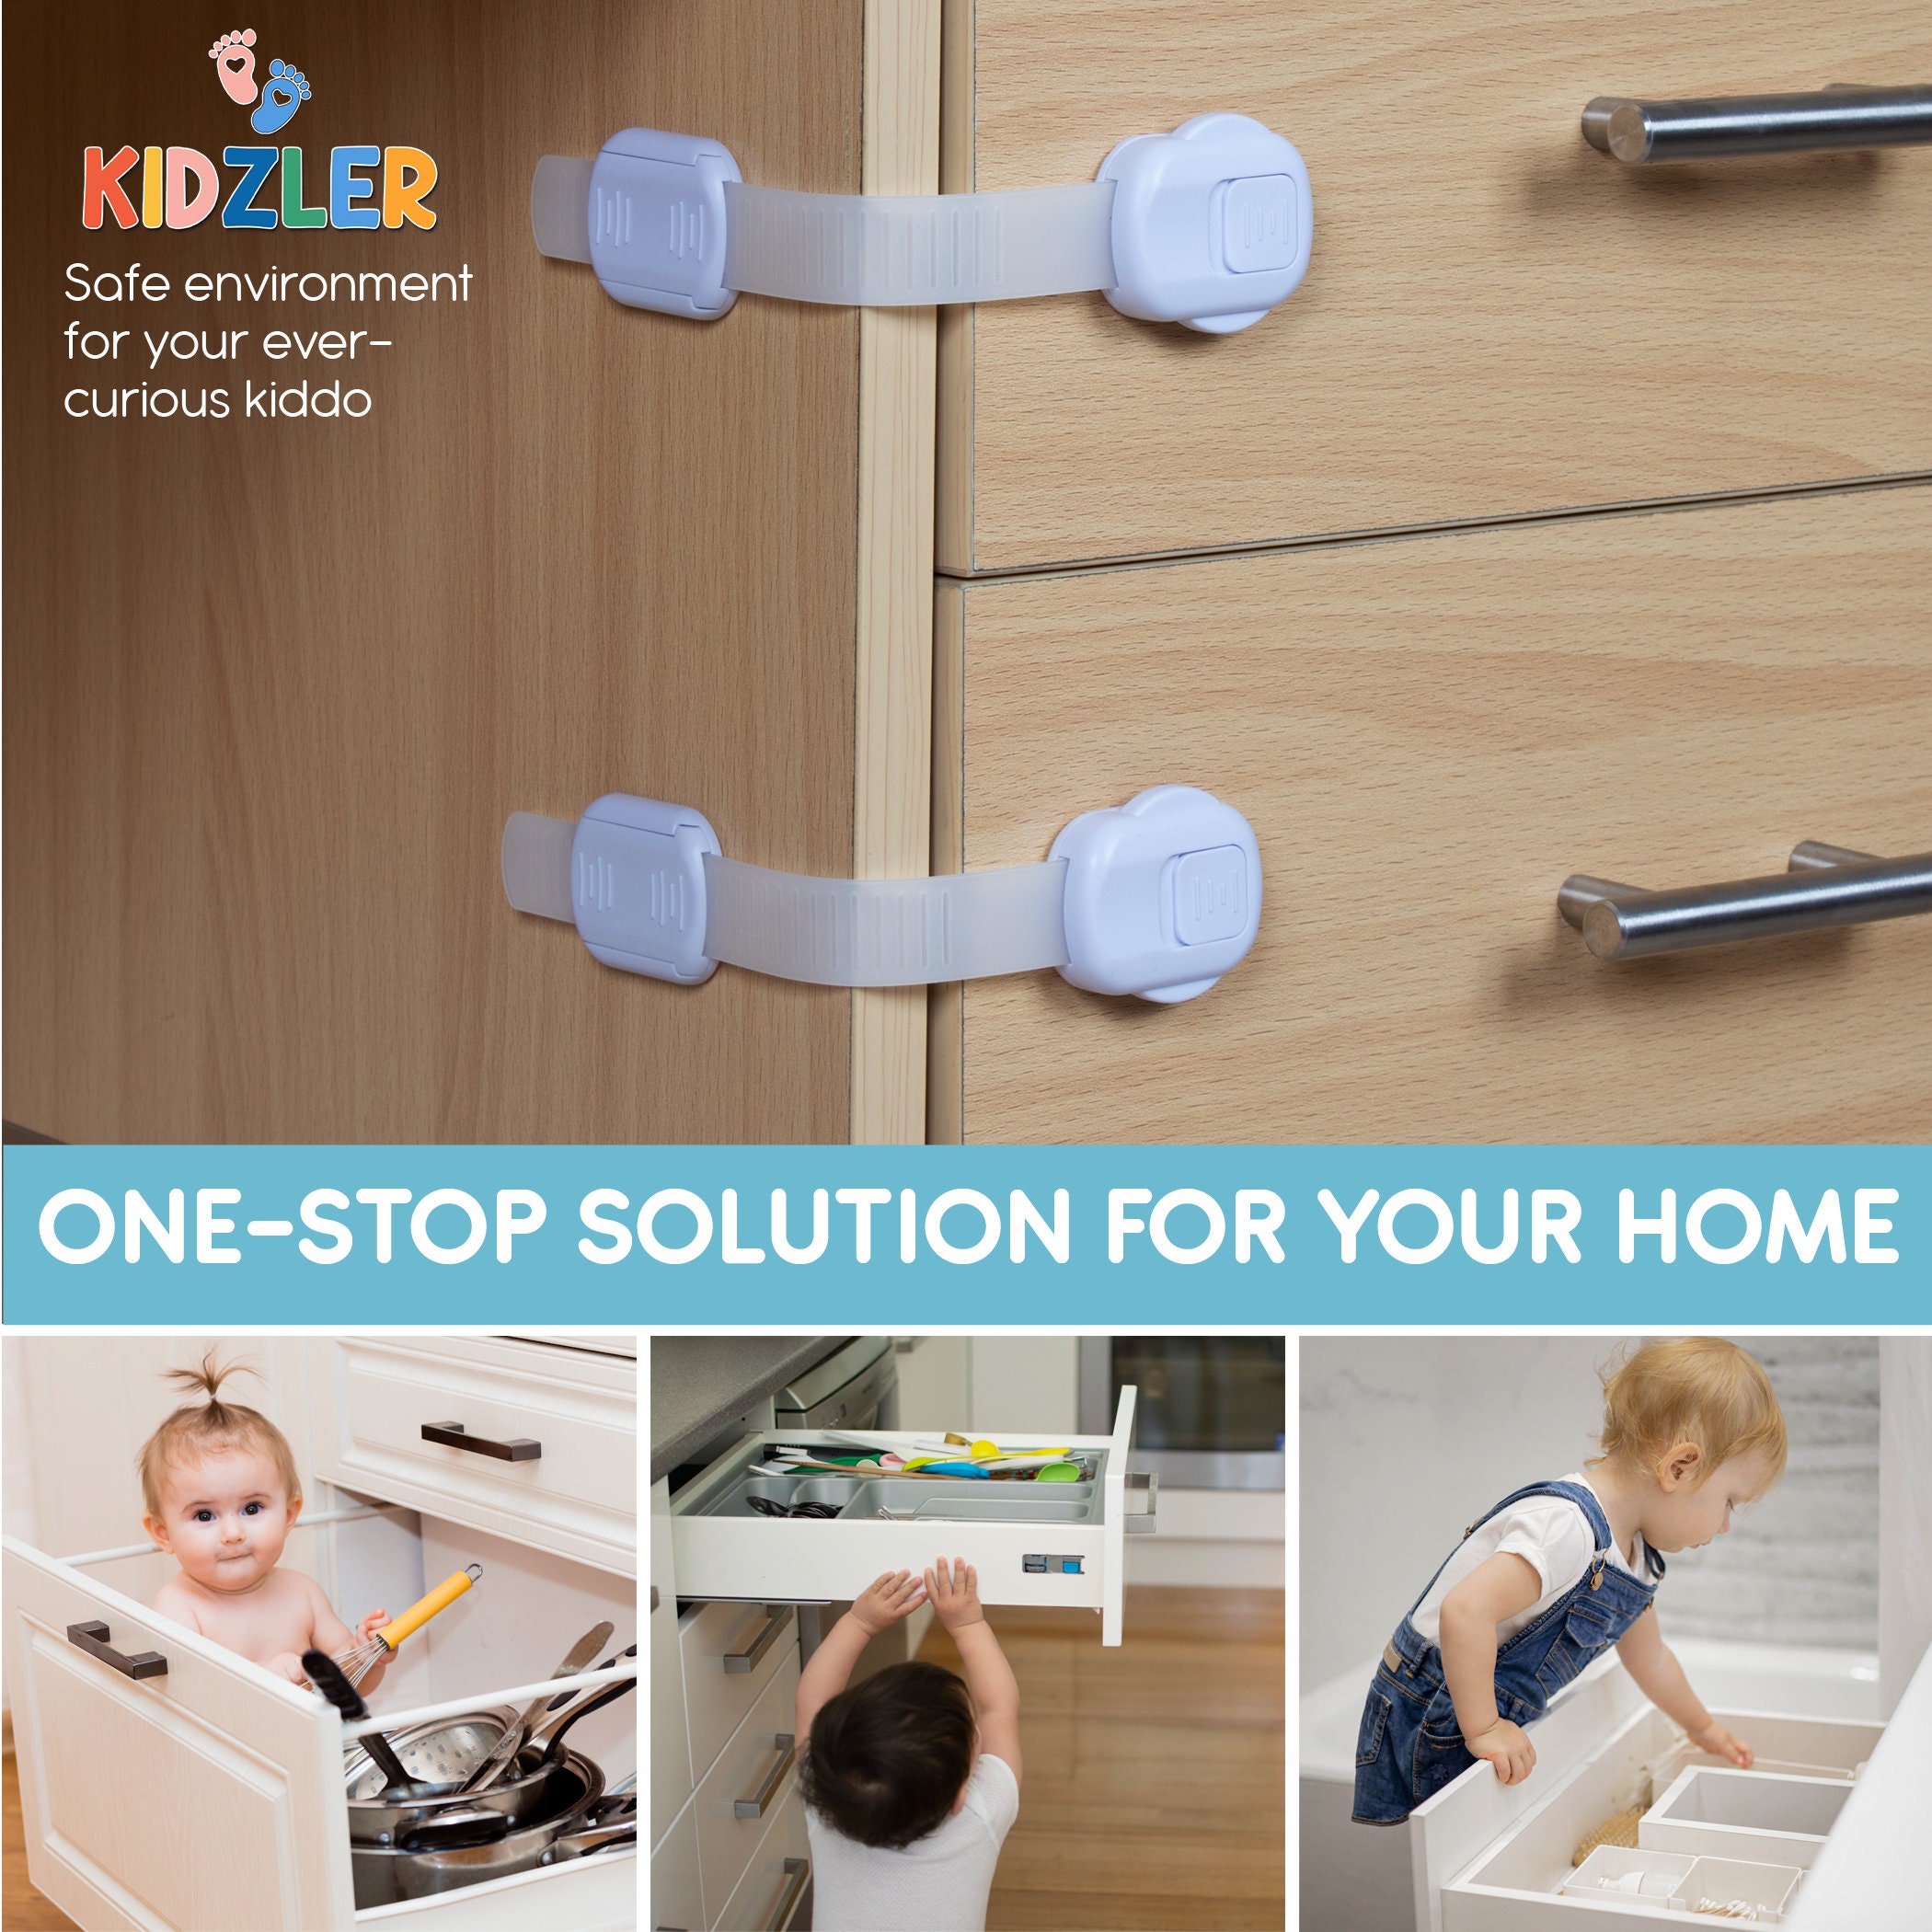 Baby Proofing Kit, House Safety, Child Proof Latches Locks for Cabinets,  Drawers, Corner Guards, Outlet Covers, Protection,safe Home, 50pcs 